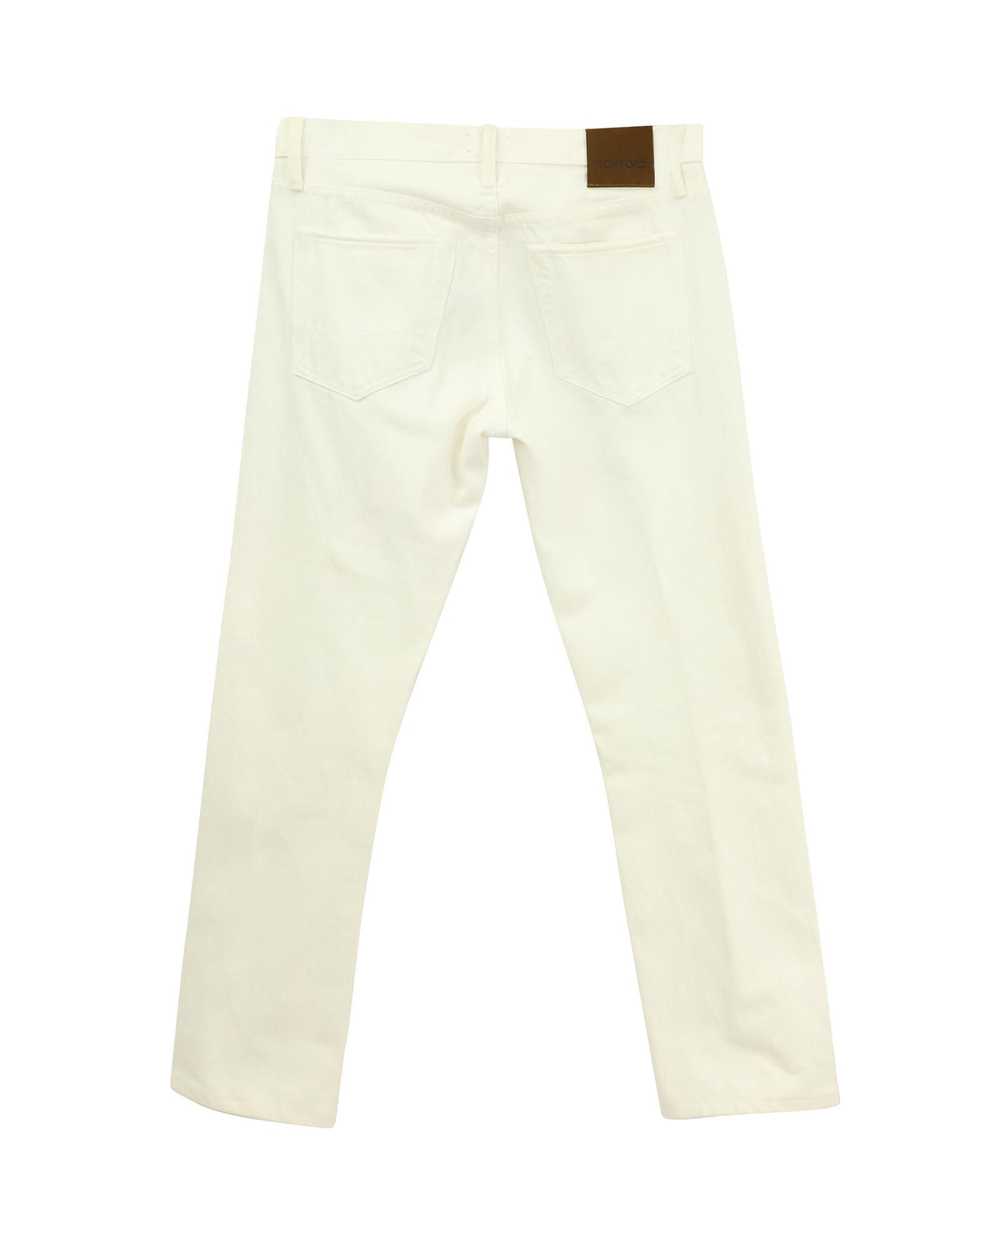 Tom Ford Straight Fit Jeans in White Cotton - image 4